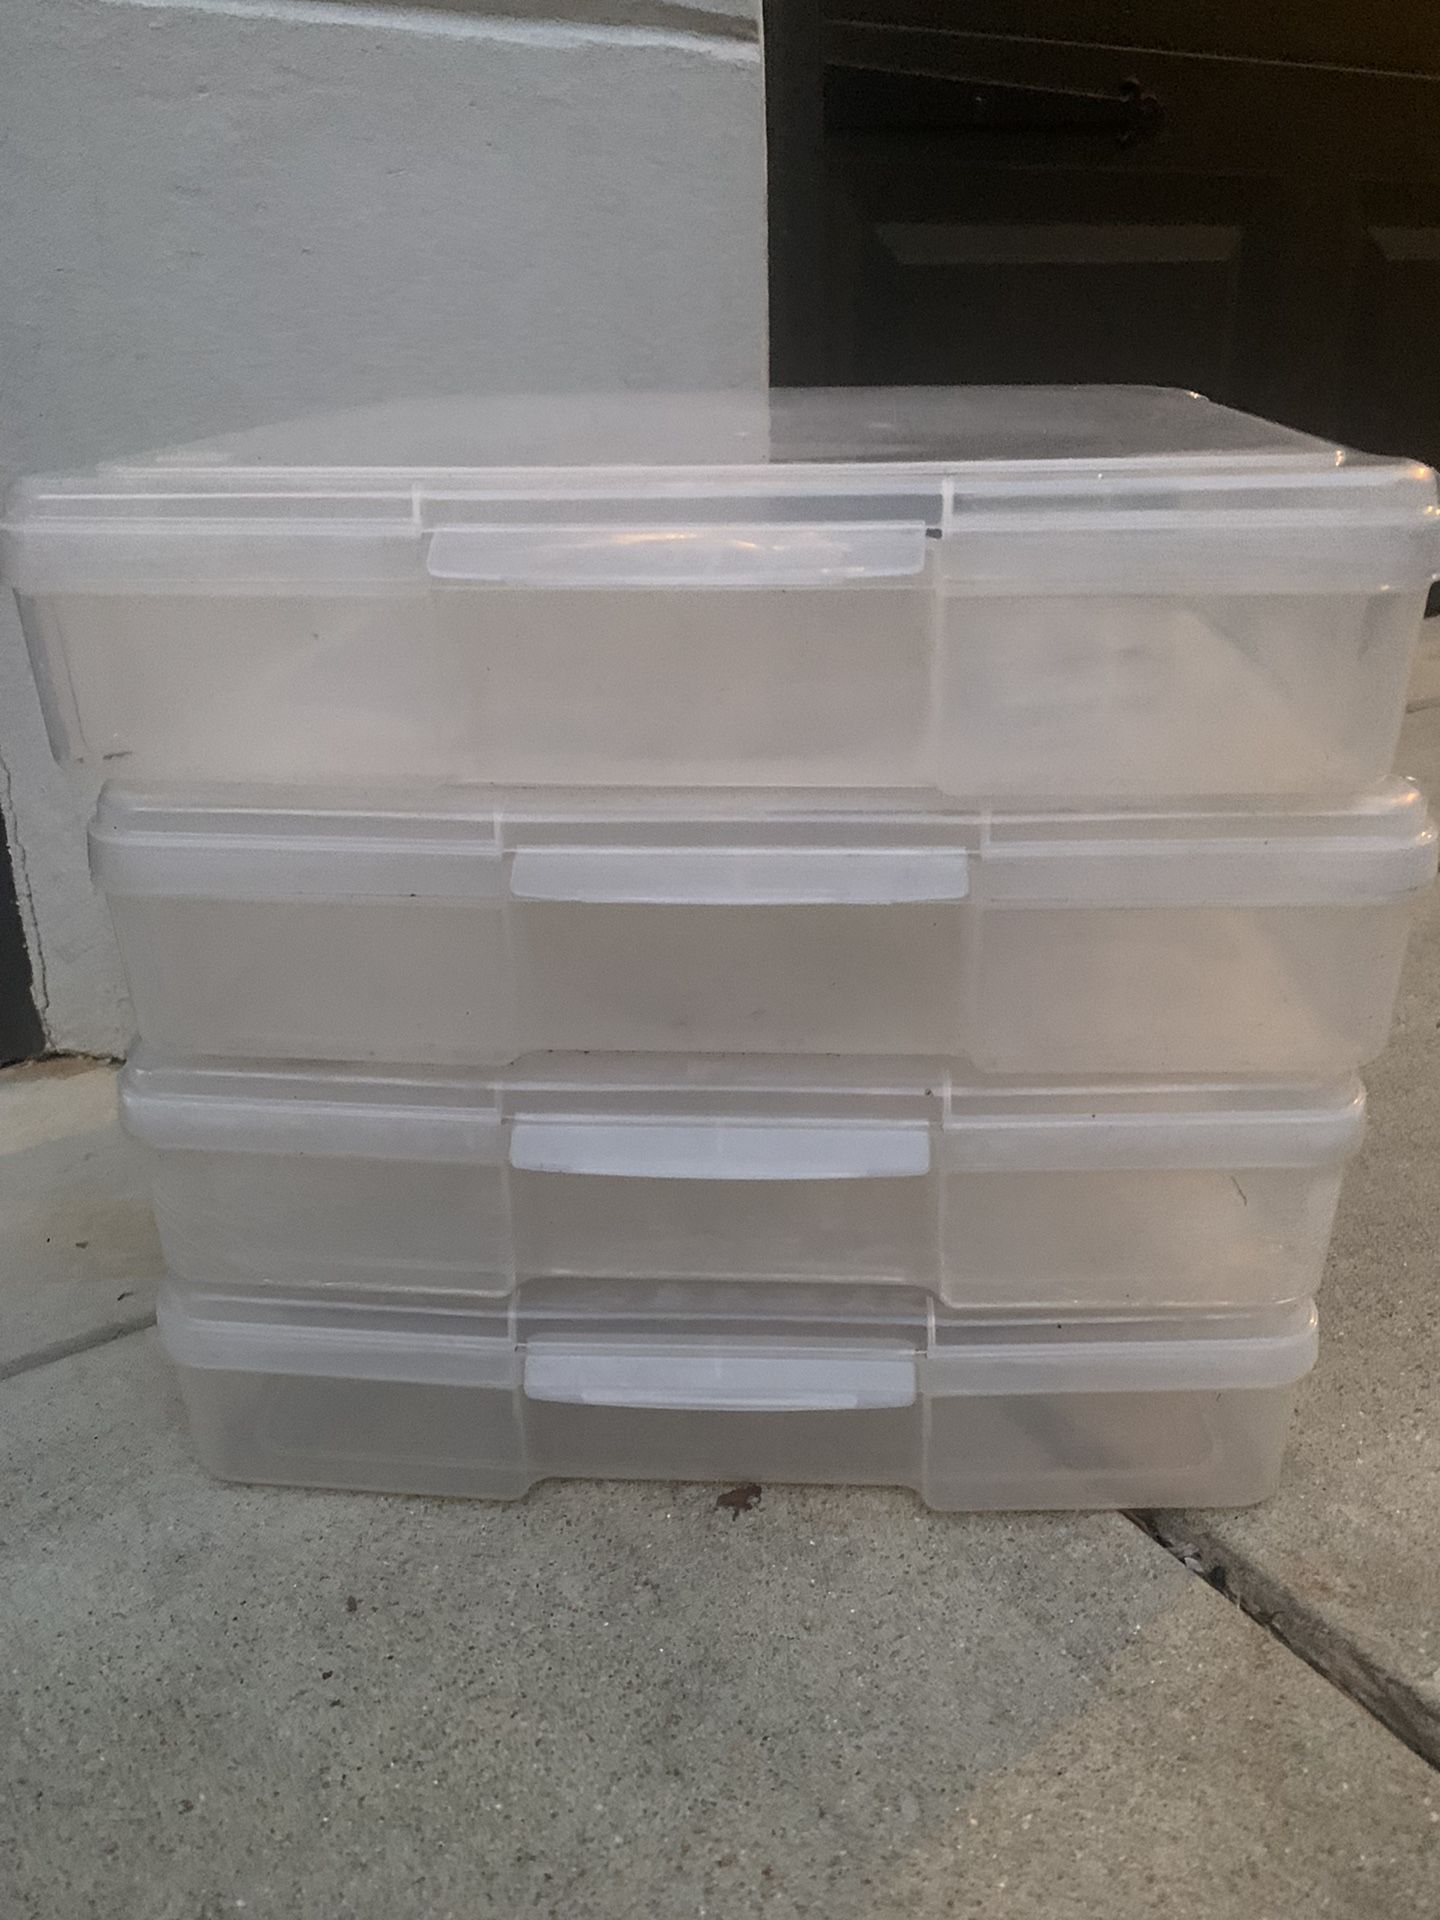 4 Clear Locking Plastic Storage Containers